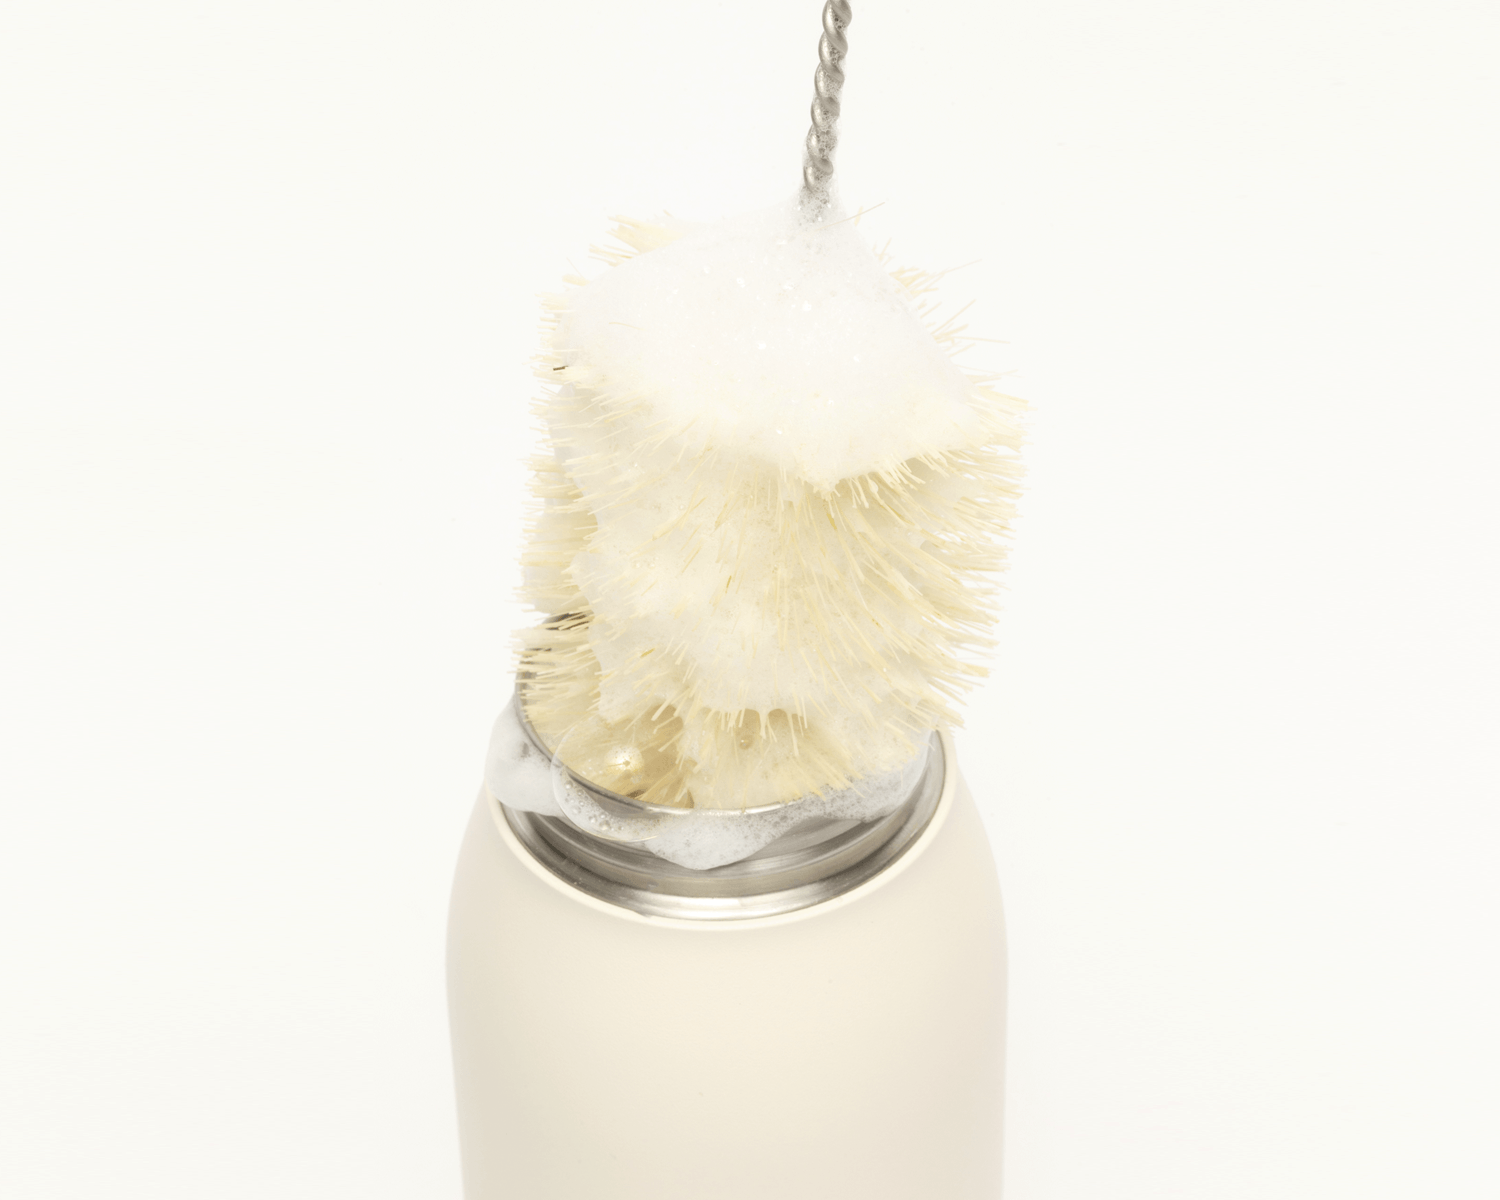 Hitch Bottle Brush creating suds inside the Hitch Bottle and Cup in Natural White